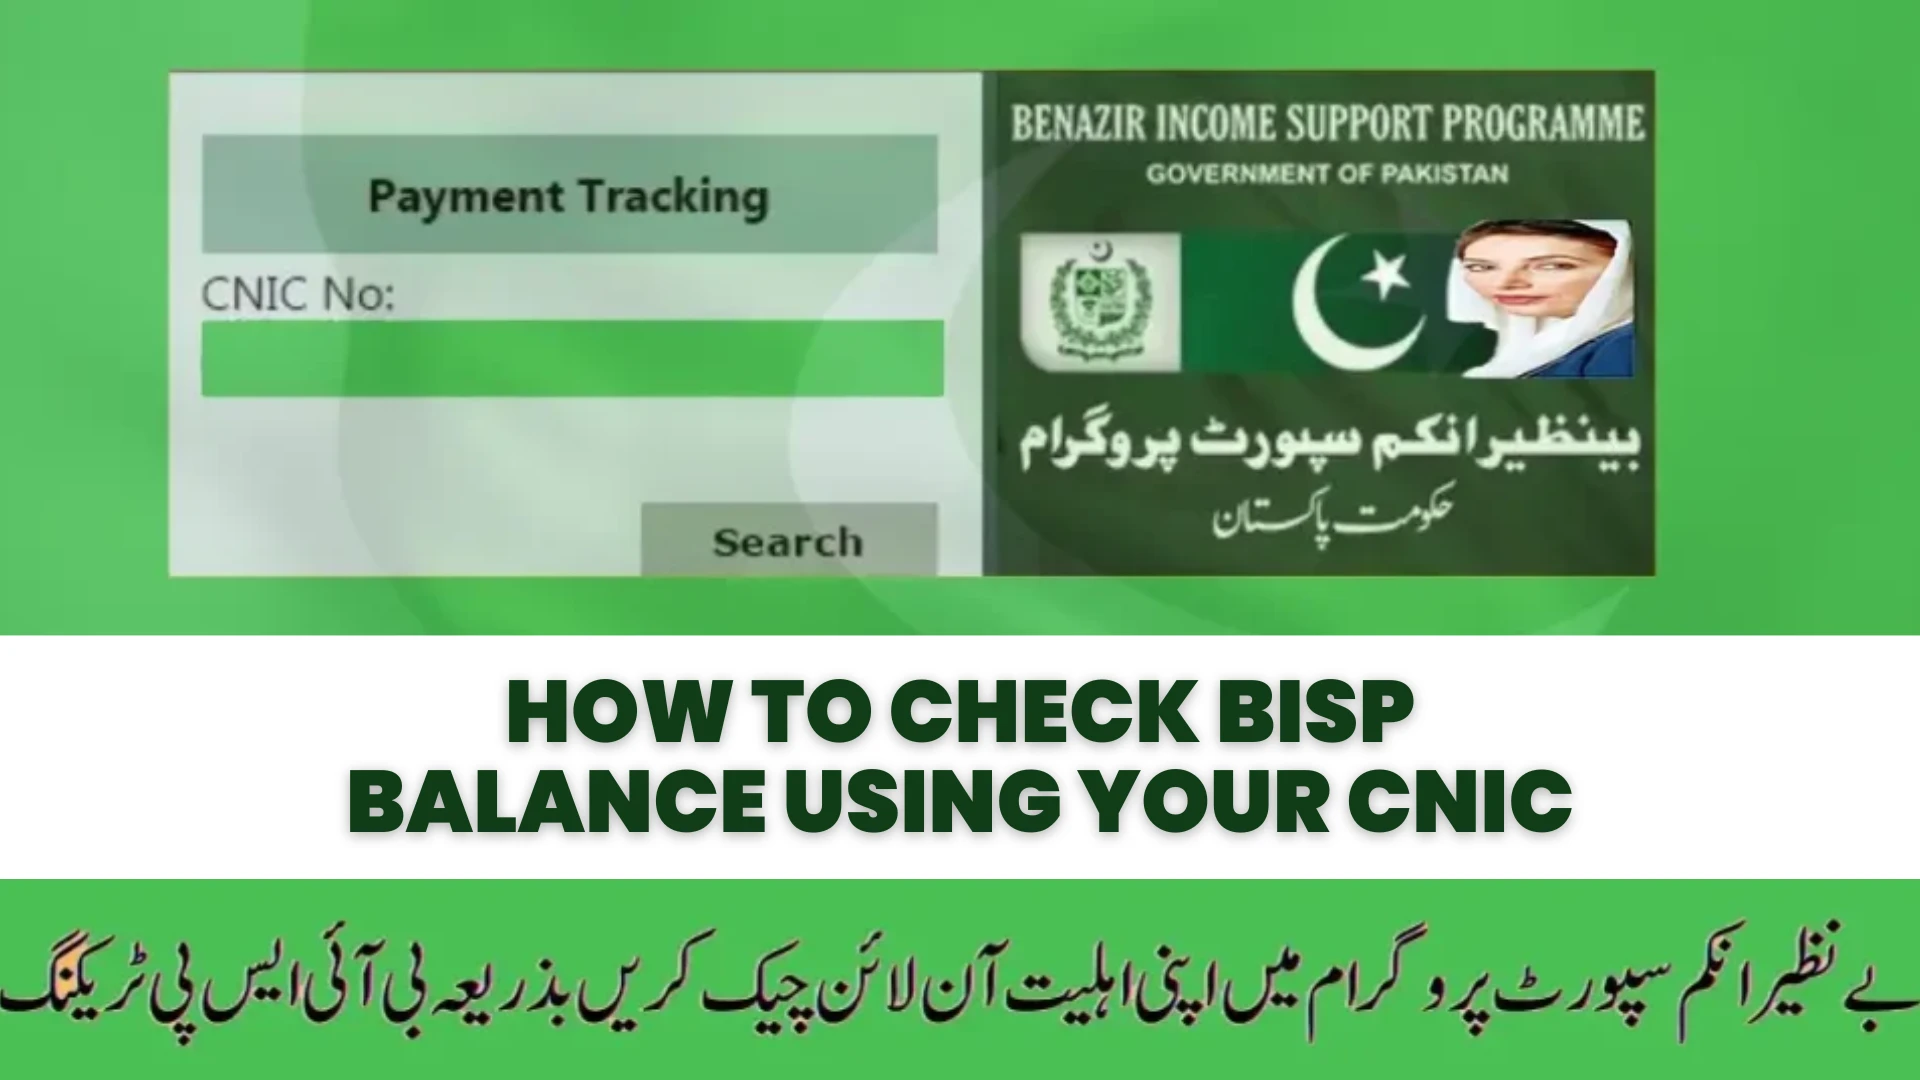 How to Check BISP Balance Using Your CNIC